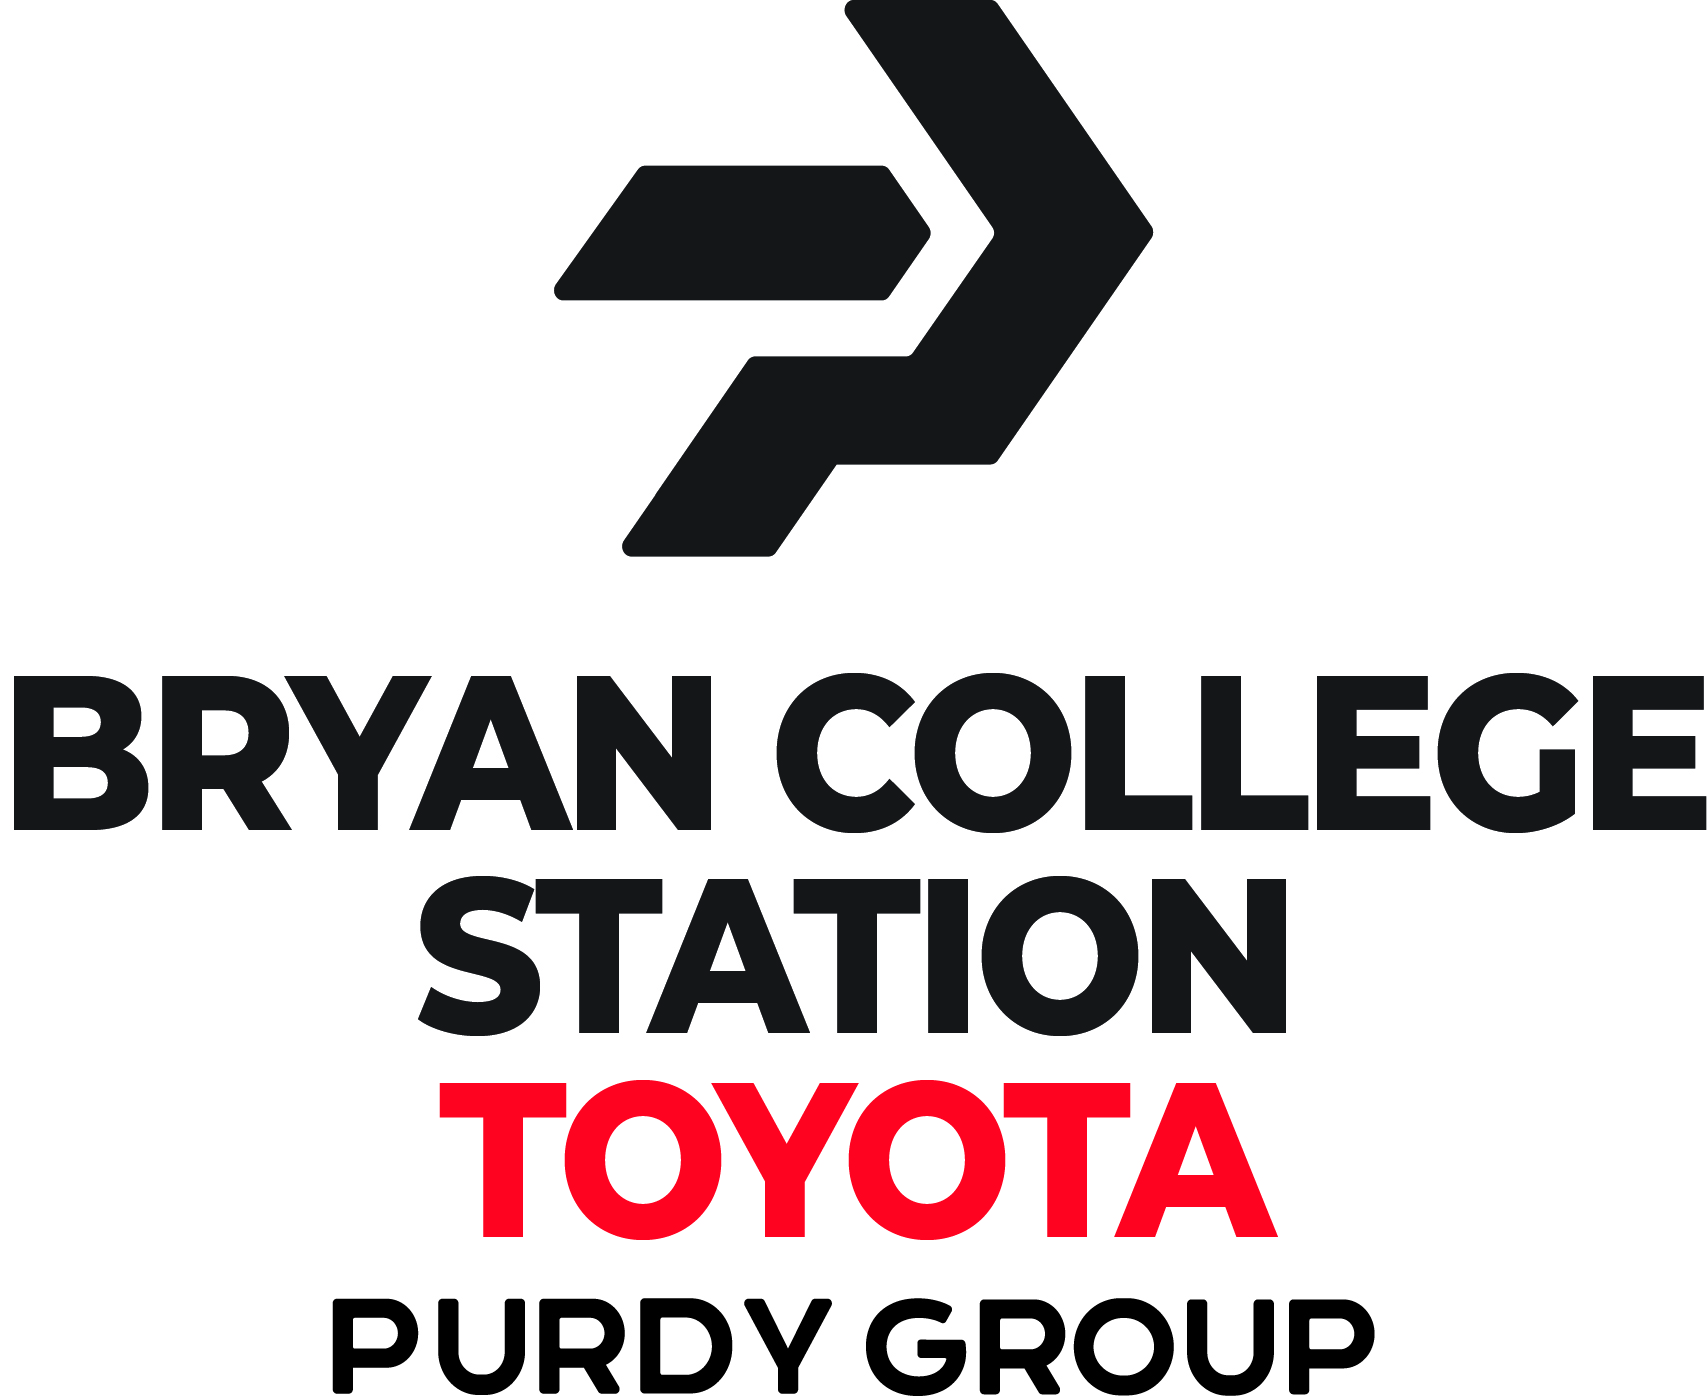 Bryan College Station Toyota - Purdy Group